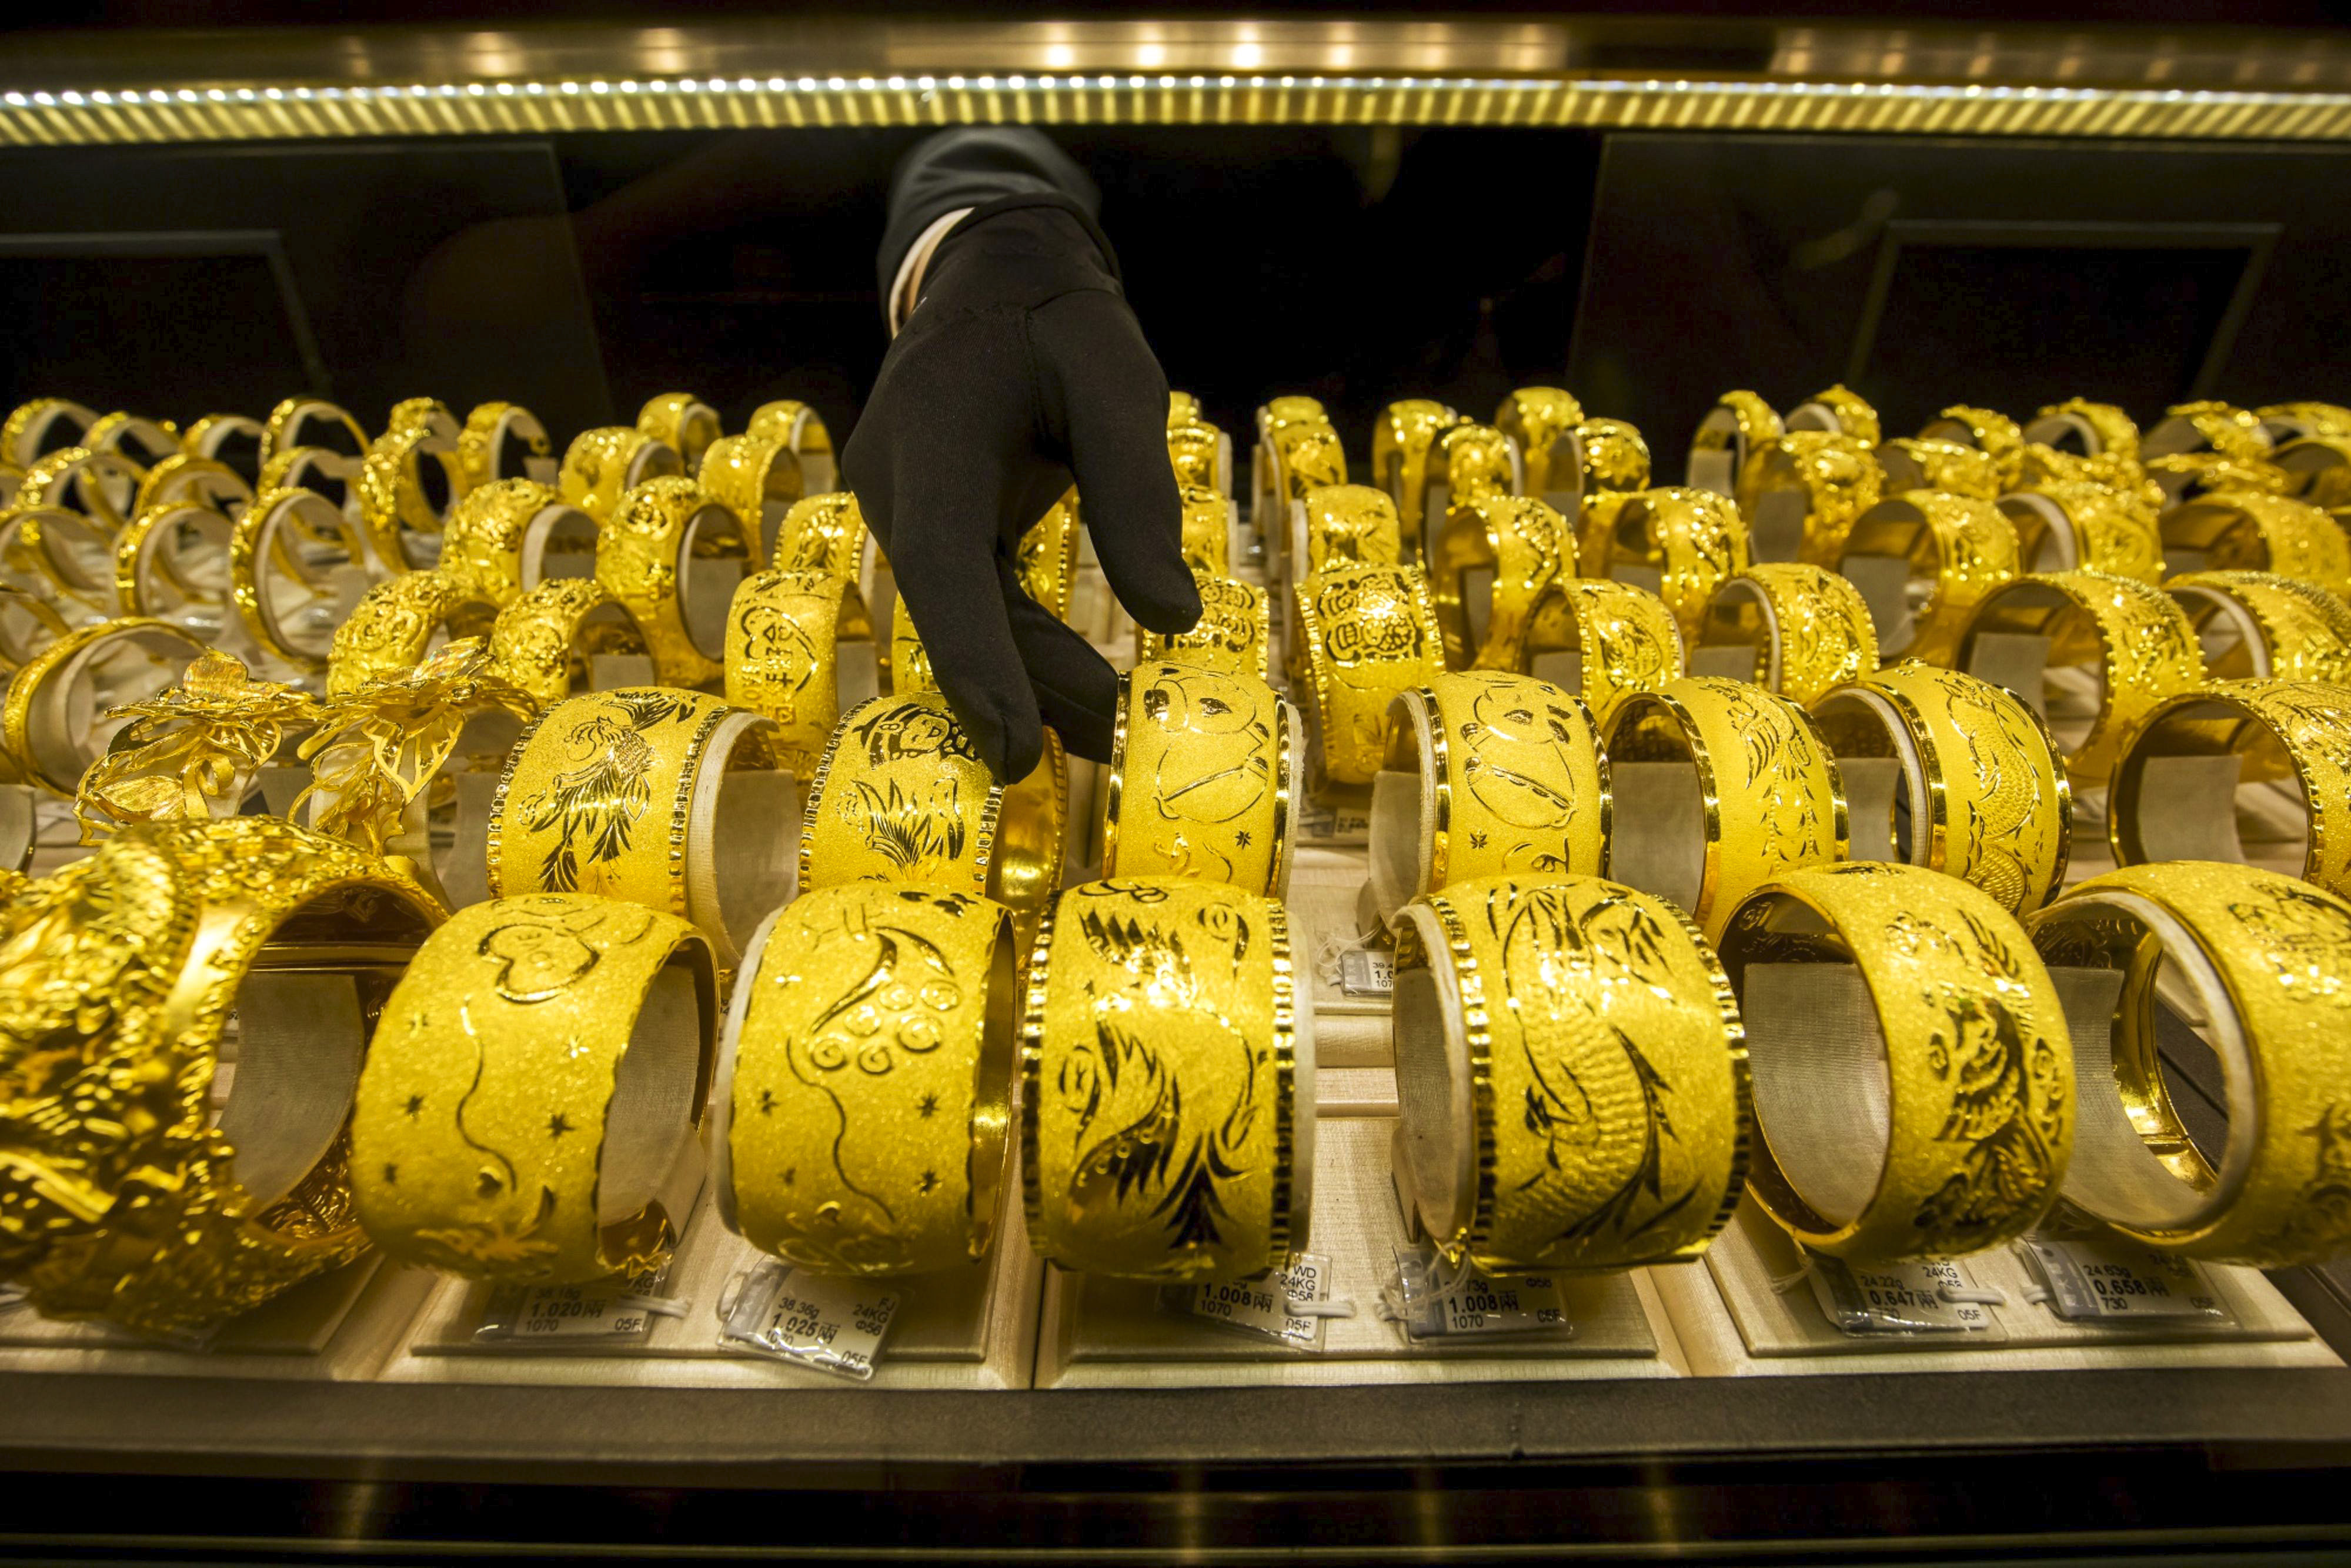 An employee arranges gold bangles in a Chow Tai Fook jewellery shop. Photo: Bloomberg